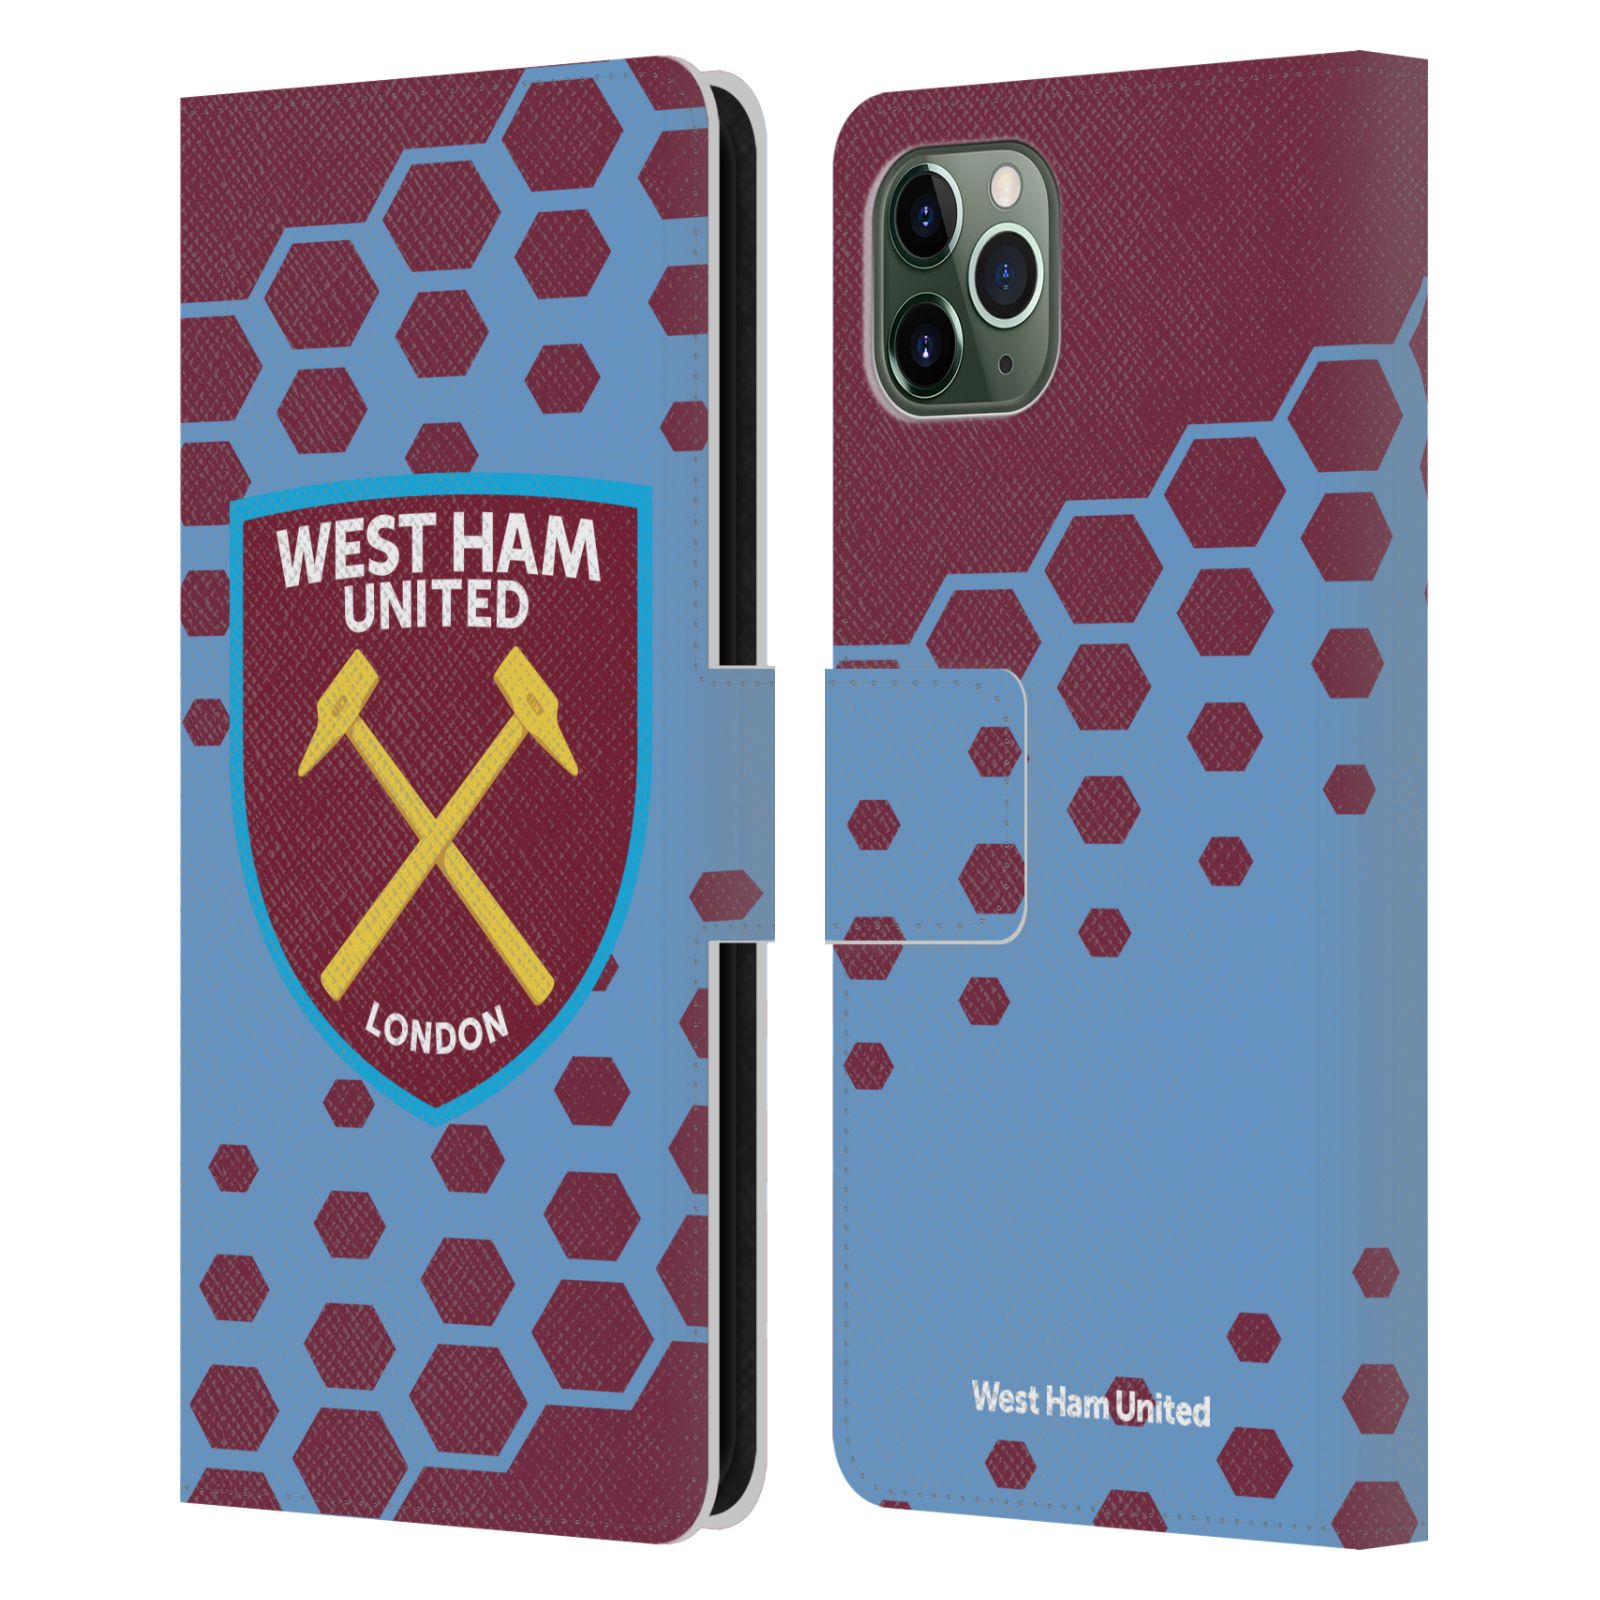 Official West Ham United FC Farewell Boleyn Gate Retro Crest Leather Book Wallet Case Cover Compatible For iPhone 7 Plus/iPhone 8 Plus